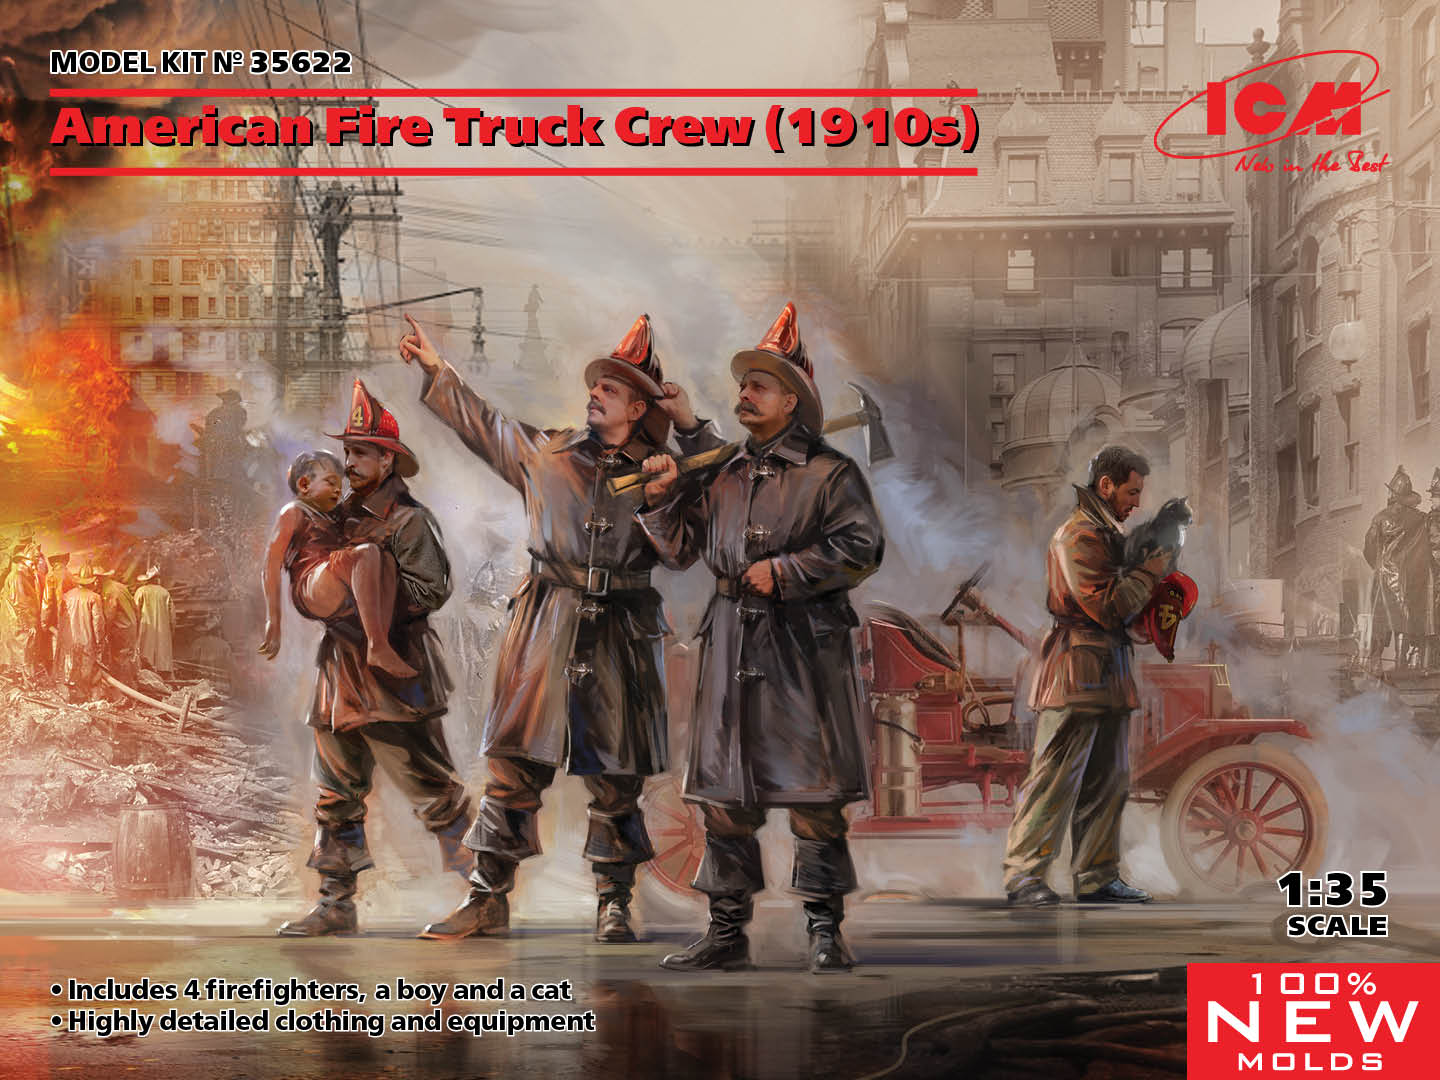 1/35 American Fire Truck Crew, 1910s (4 fig.)